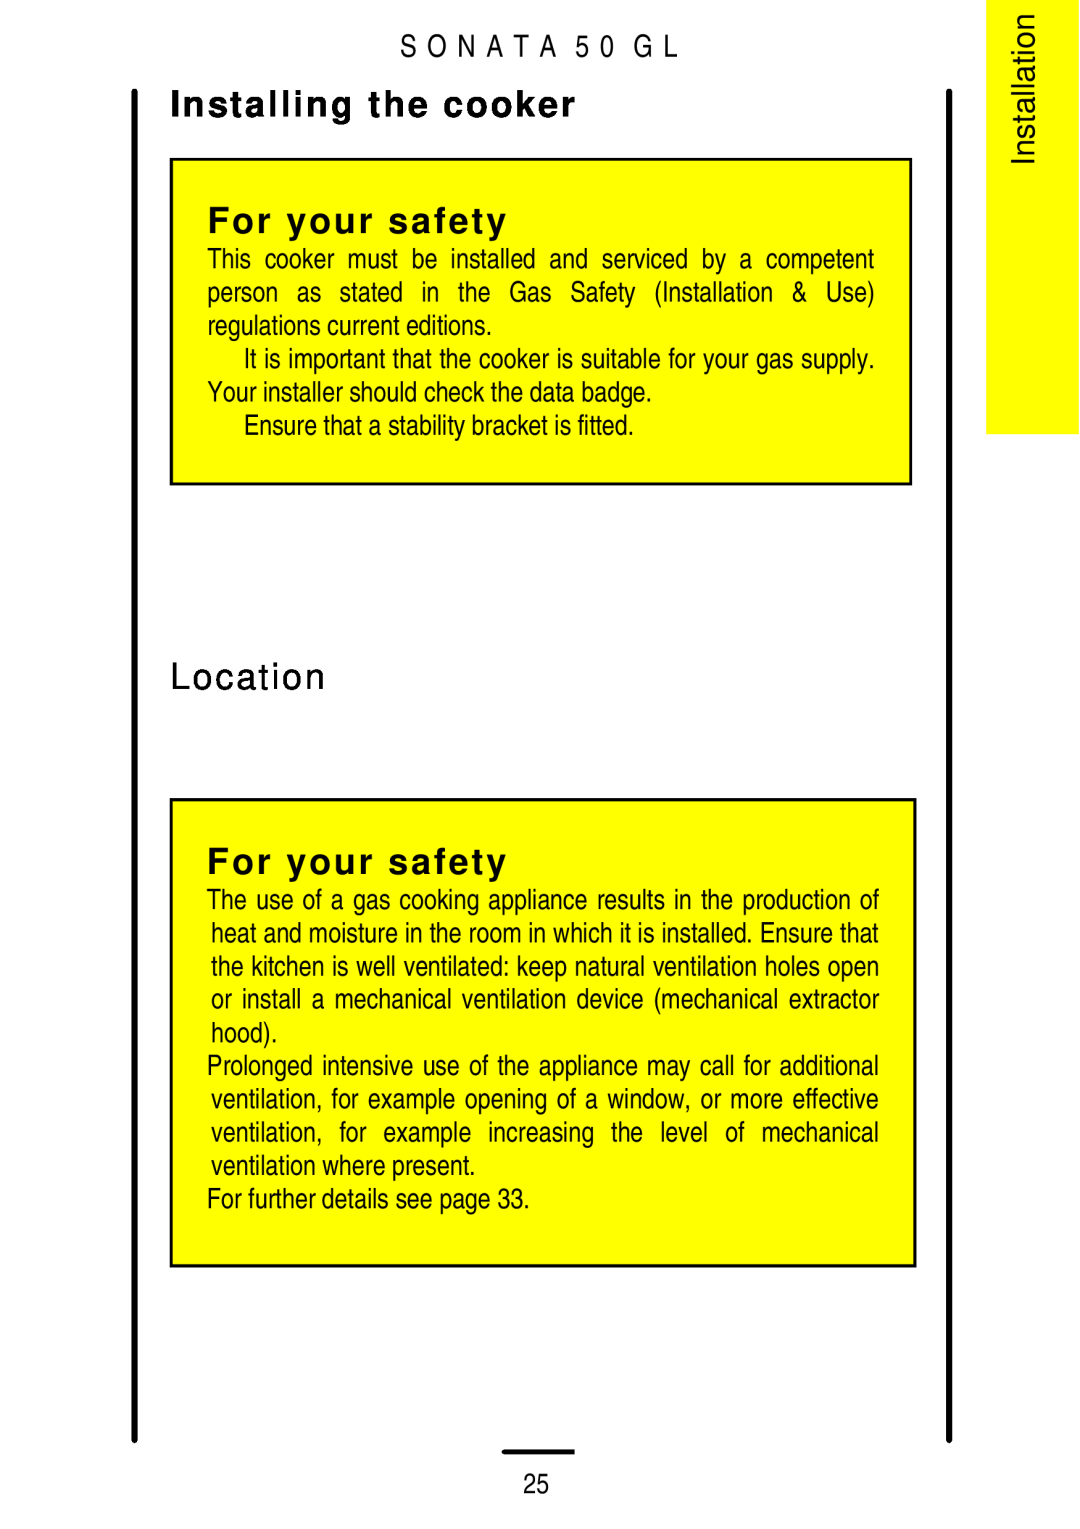 Electrolux installation instructions Installing the cooker For your safety, Location, Installation, S O N A T A 5 0 G L 